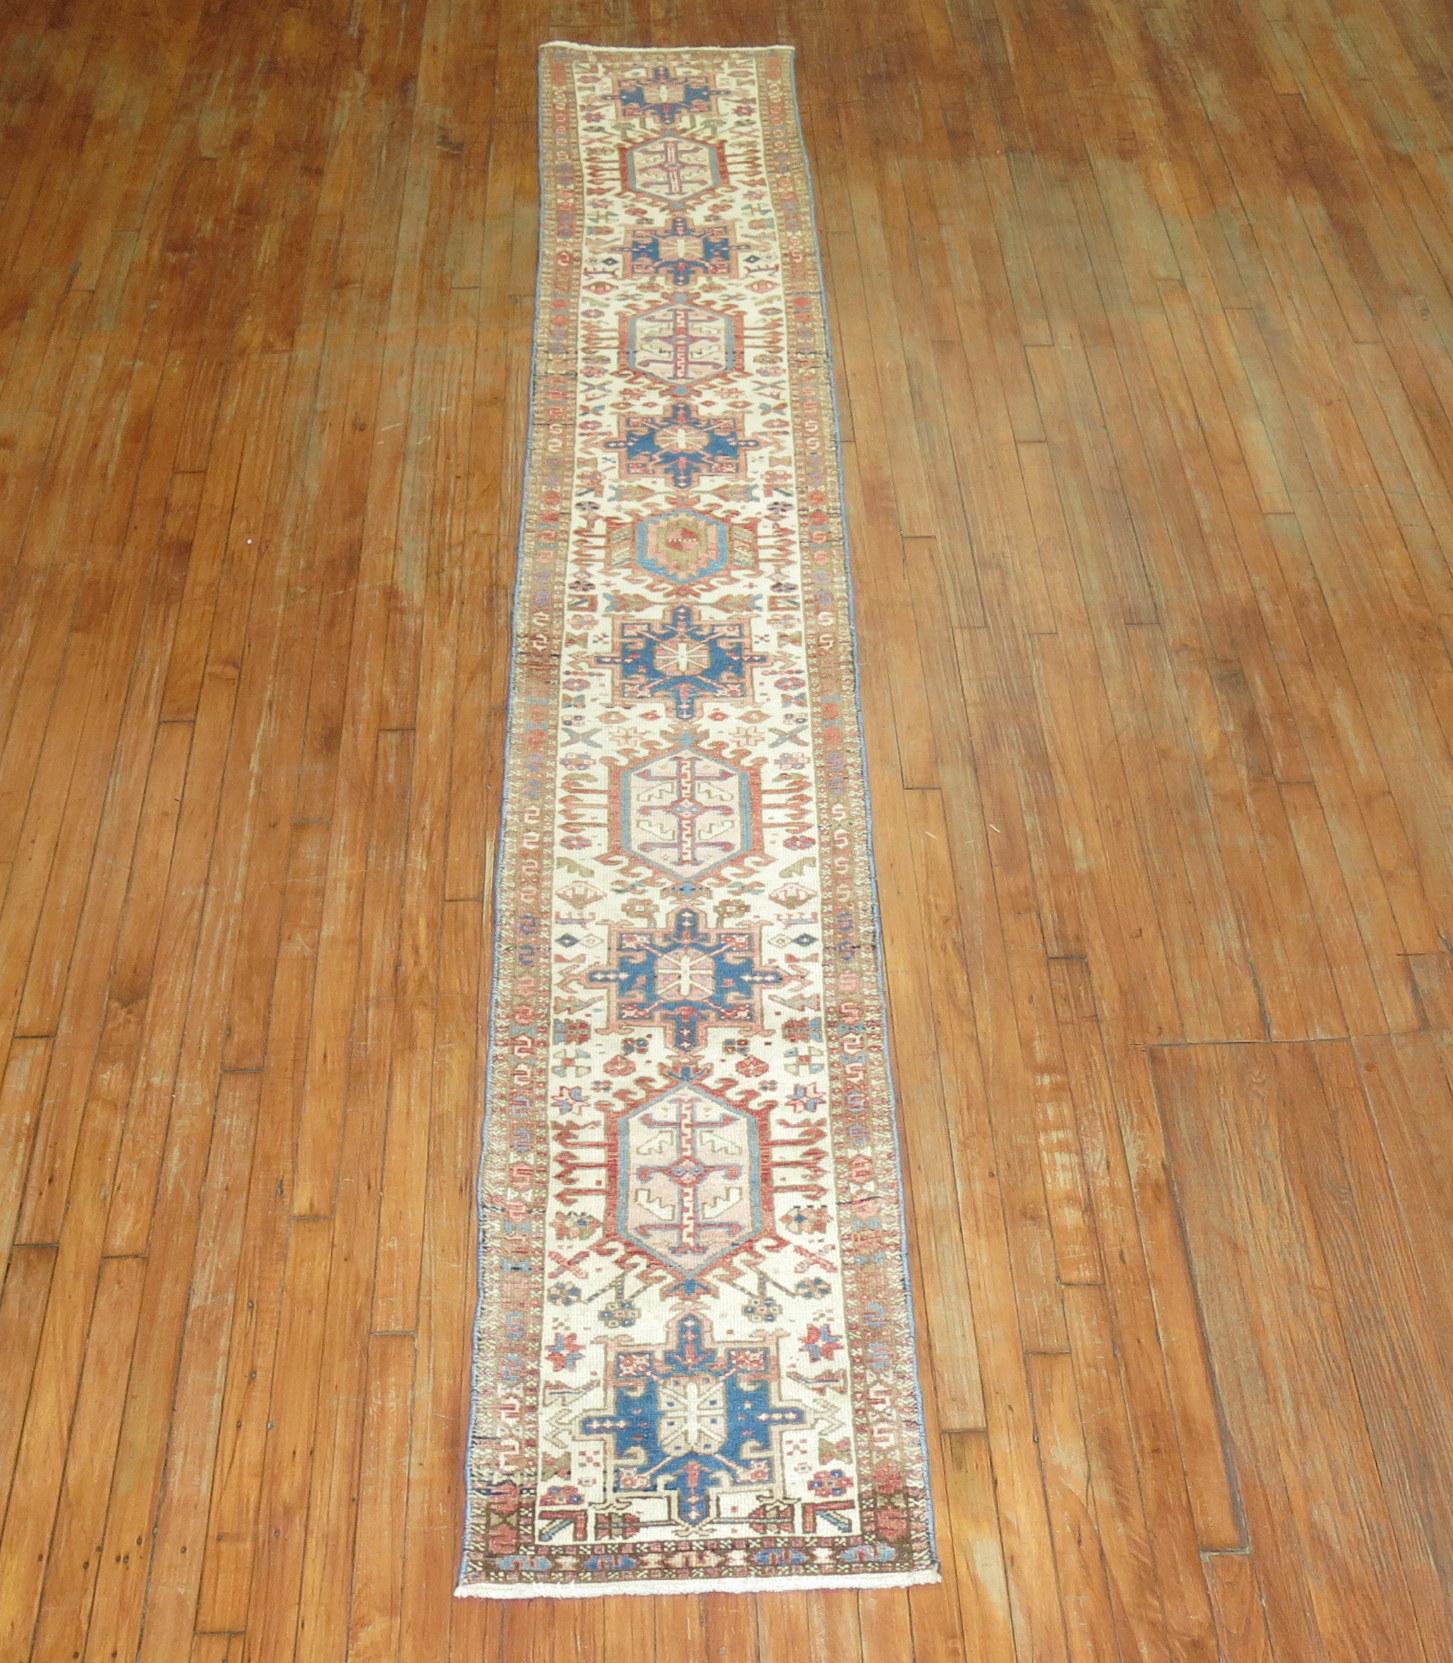 Very narrow one of a kind Persian heriz runner from the second quarter of the 20th century. Pink, rust, blue tones on an ivory ground. The size is original, circa 1940s.

Measures: 1'10